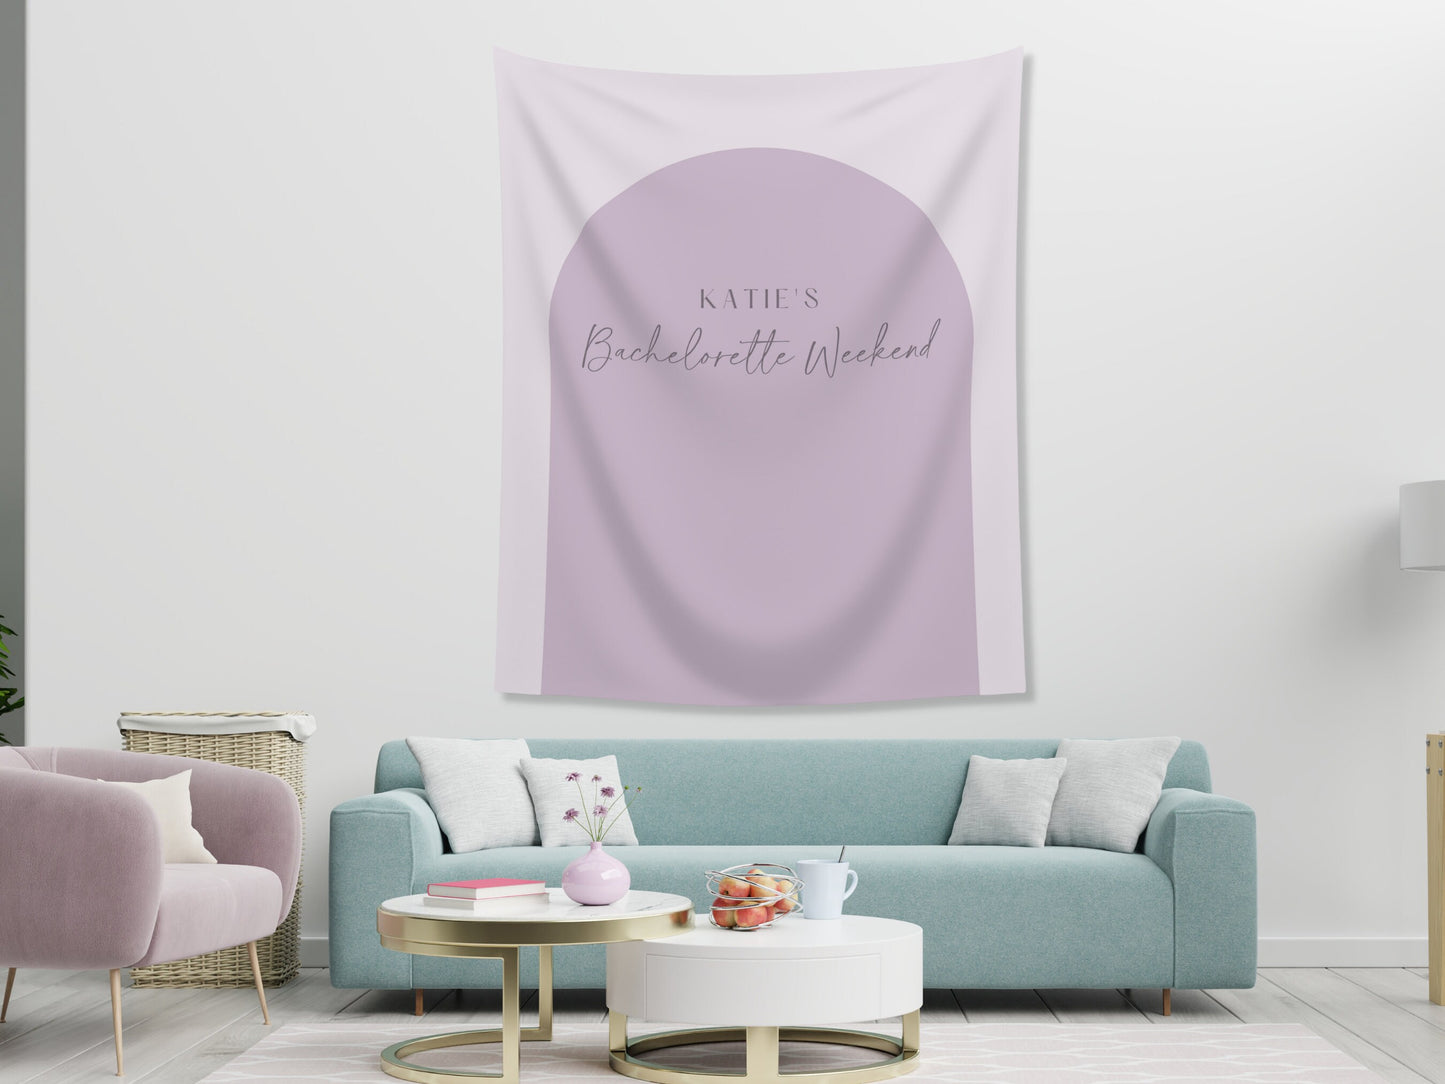 Arch Custom Text Party Banner| Personalized Arch Backdrop Retro Boho Bachelorette, Baby Shower and Birthday Parties